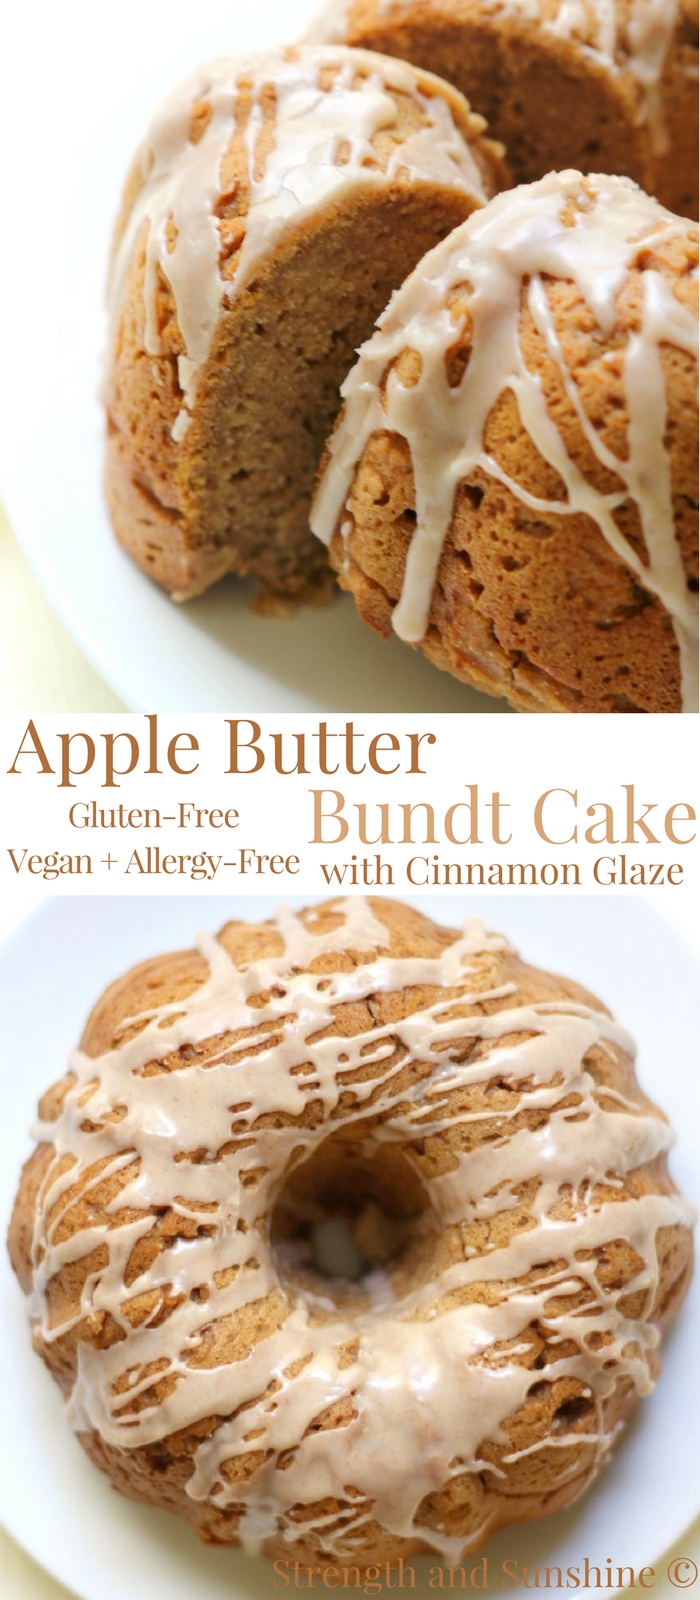 Gluten-Free Apple Butter Bundt Cake with Cinnamon Glaze (Vegan, Allergy-Free) | Strength and Sunshine @RebeccaGF666 A delicious dessert for the season. Gluten-Free Apple Butter Bundt Cake with Cinnamon Glaze that's vegan and top 8 allergy-free. Combining the deep and rich flavors of apple butter and seasonal spices for one healthy and sweet recipe treat! #glutenfree #vegan #applebutter #cake #bundtcake #cinnamon